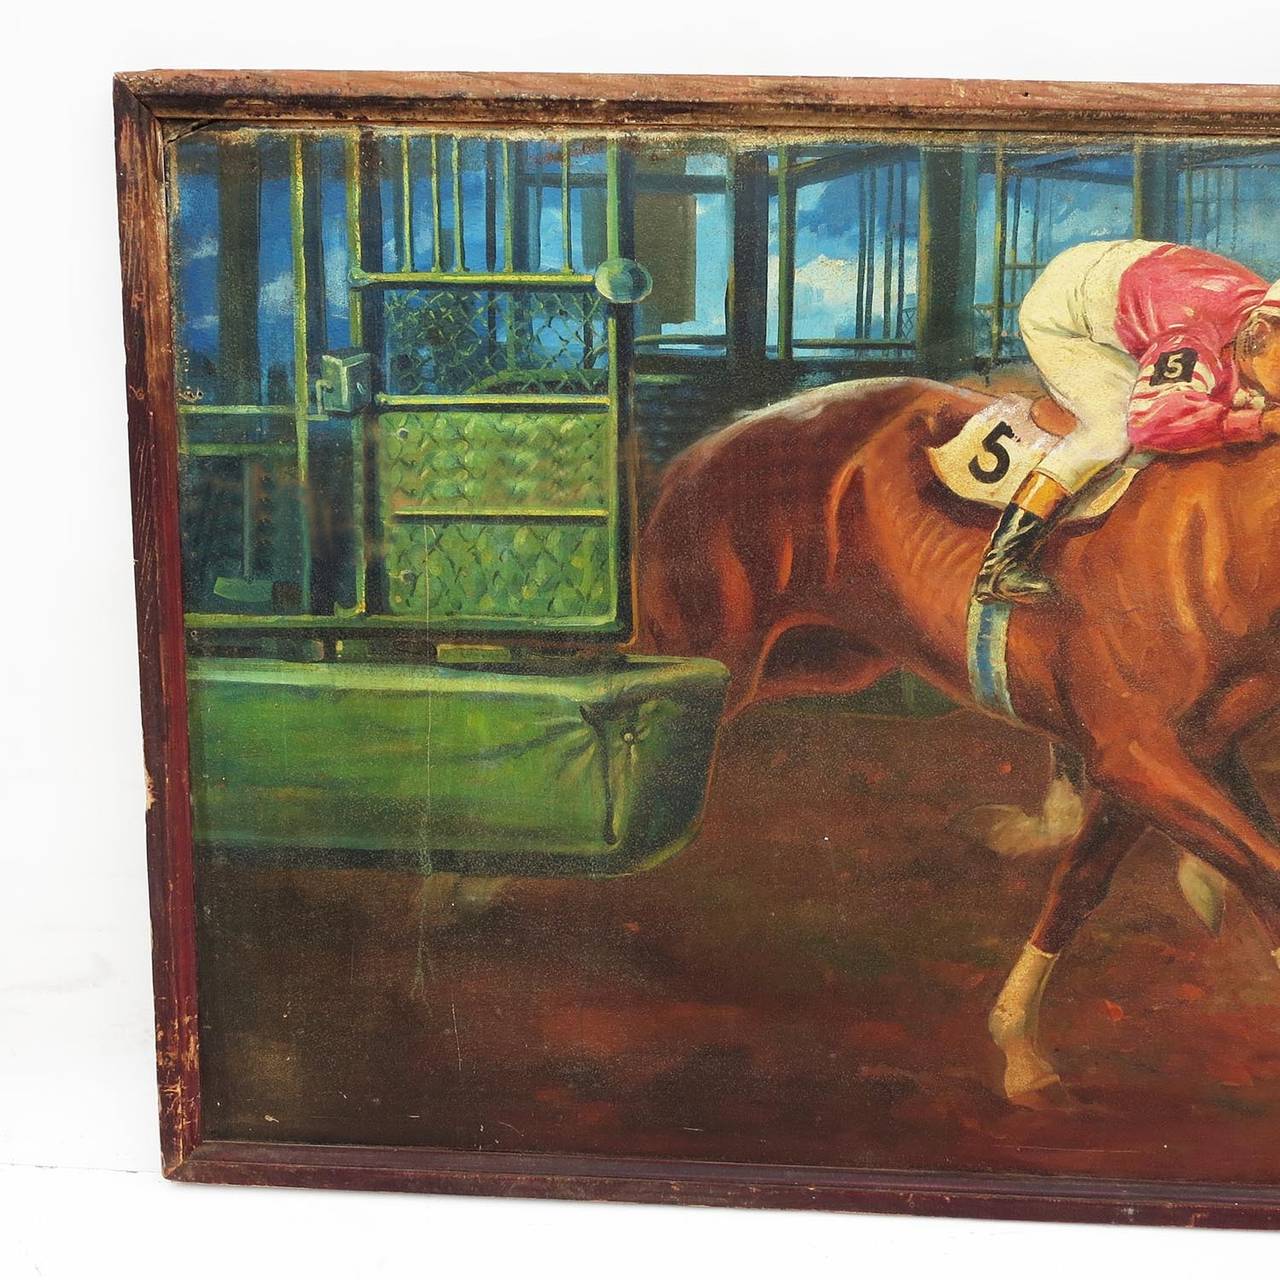 A fantastic stylized oil painting by American artist Anthony J. Cucchi. The painting is oil on board, in an original wooden frame. We have two racing theme paintings by the same artist, and a discounted package price can be had for the pair.